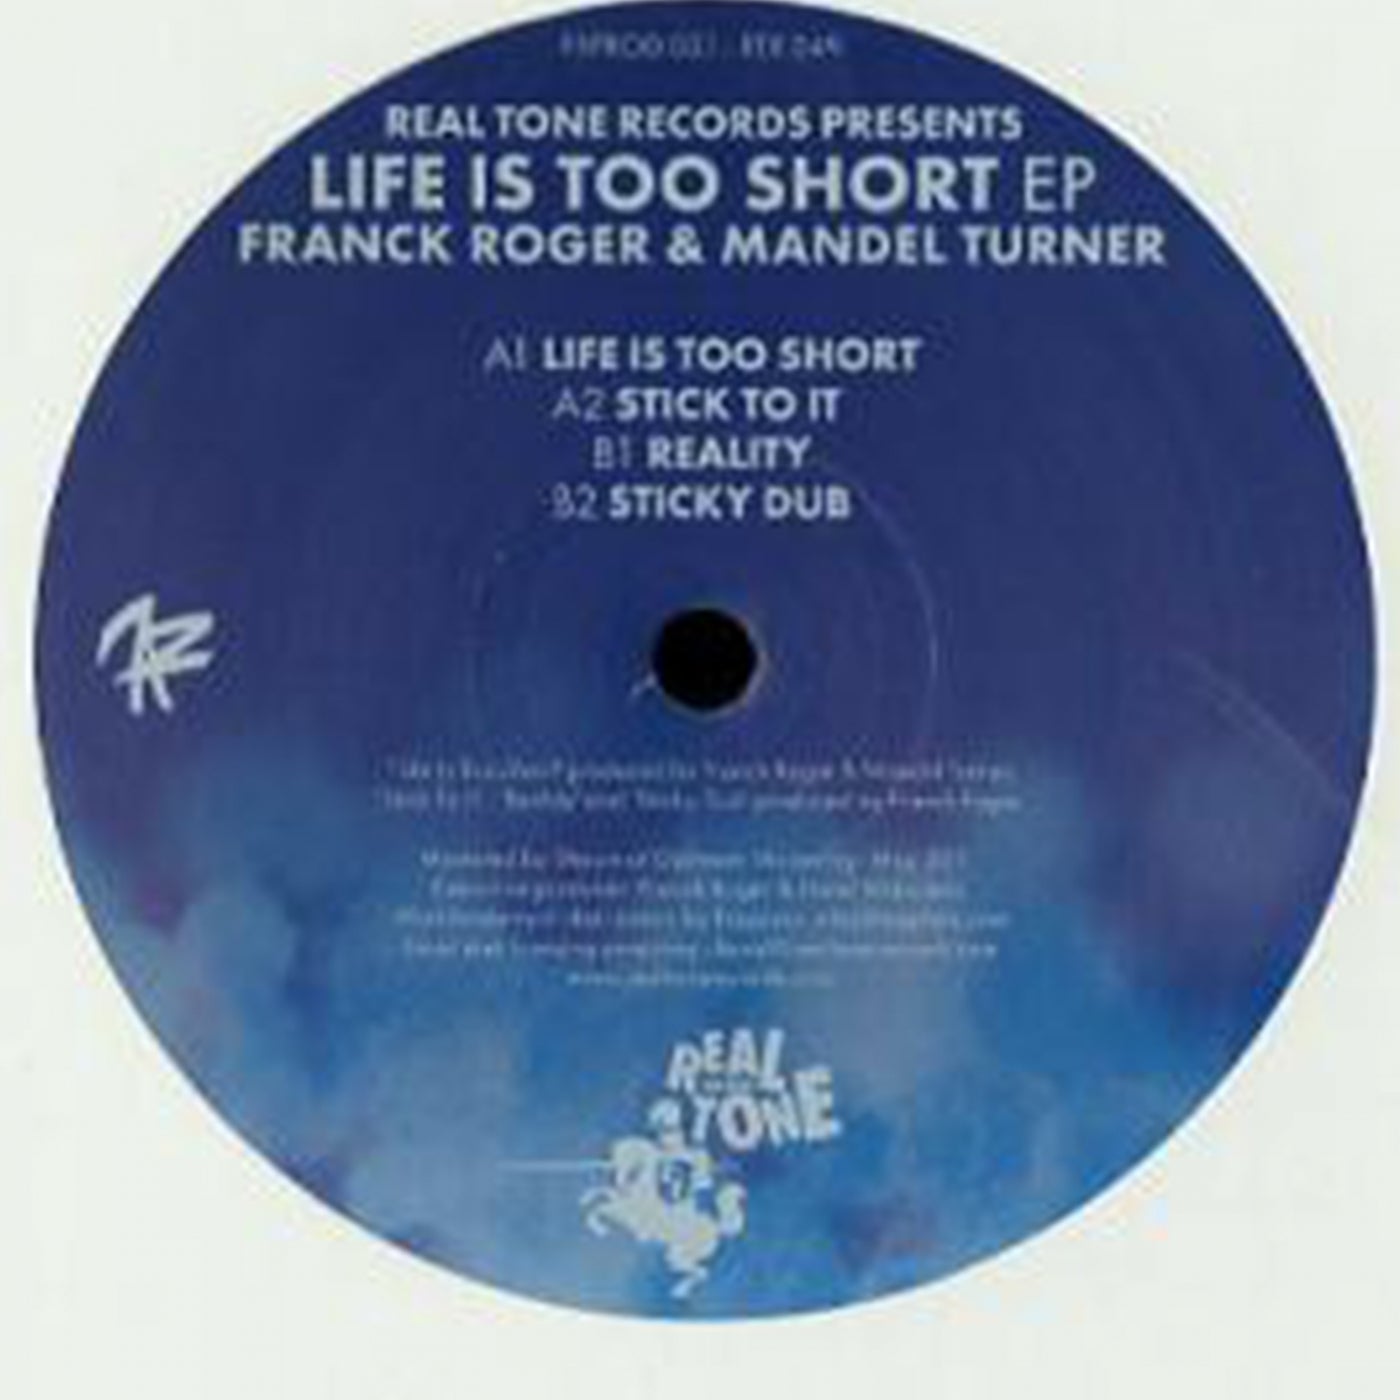 Life is Too Short EP